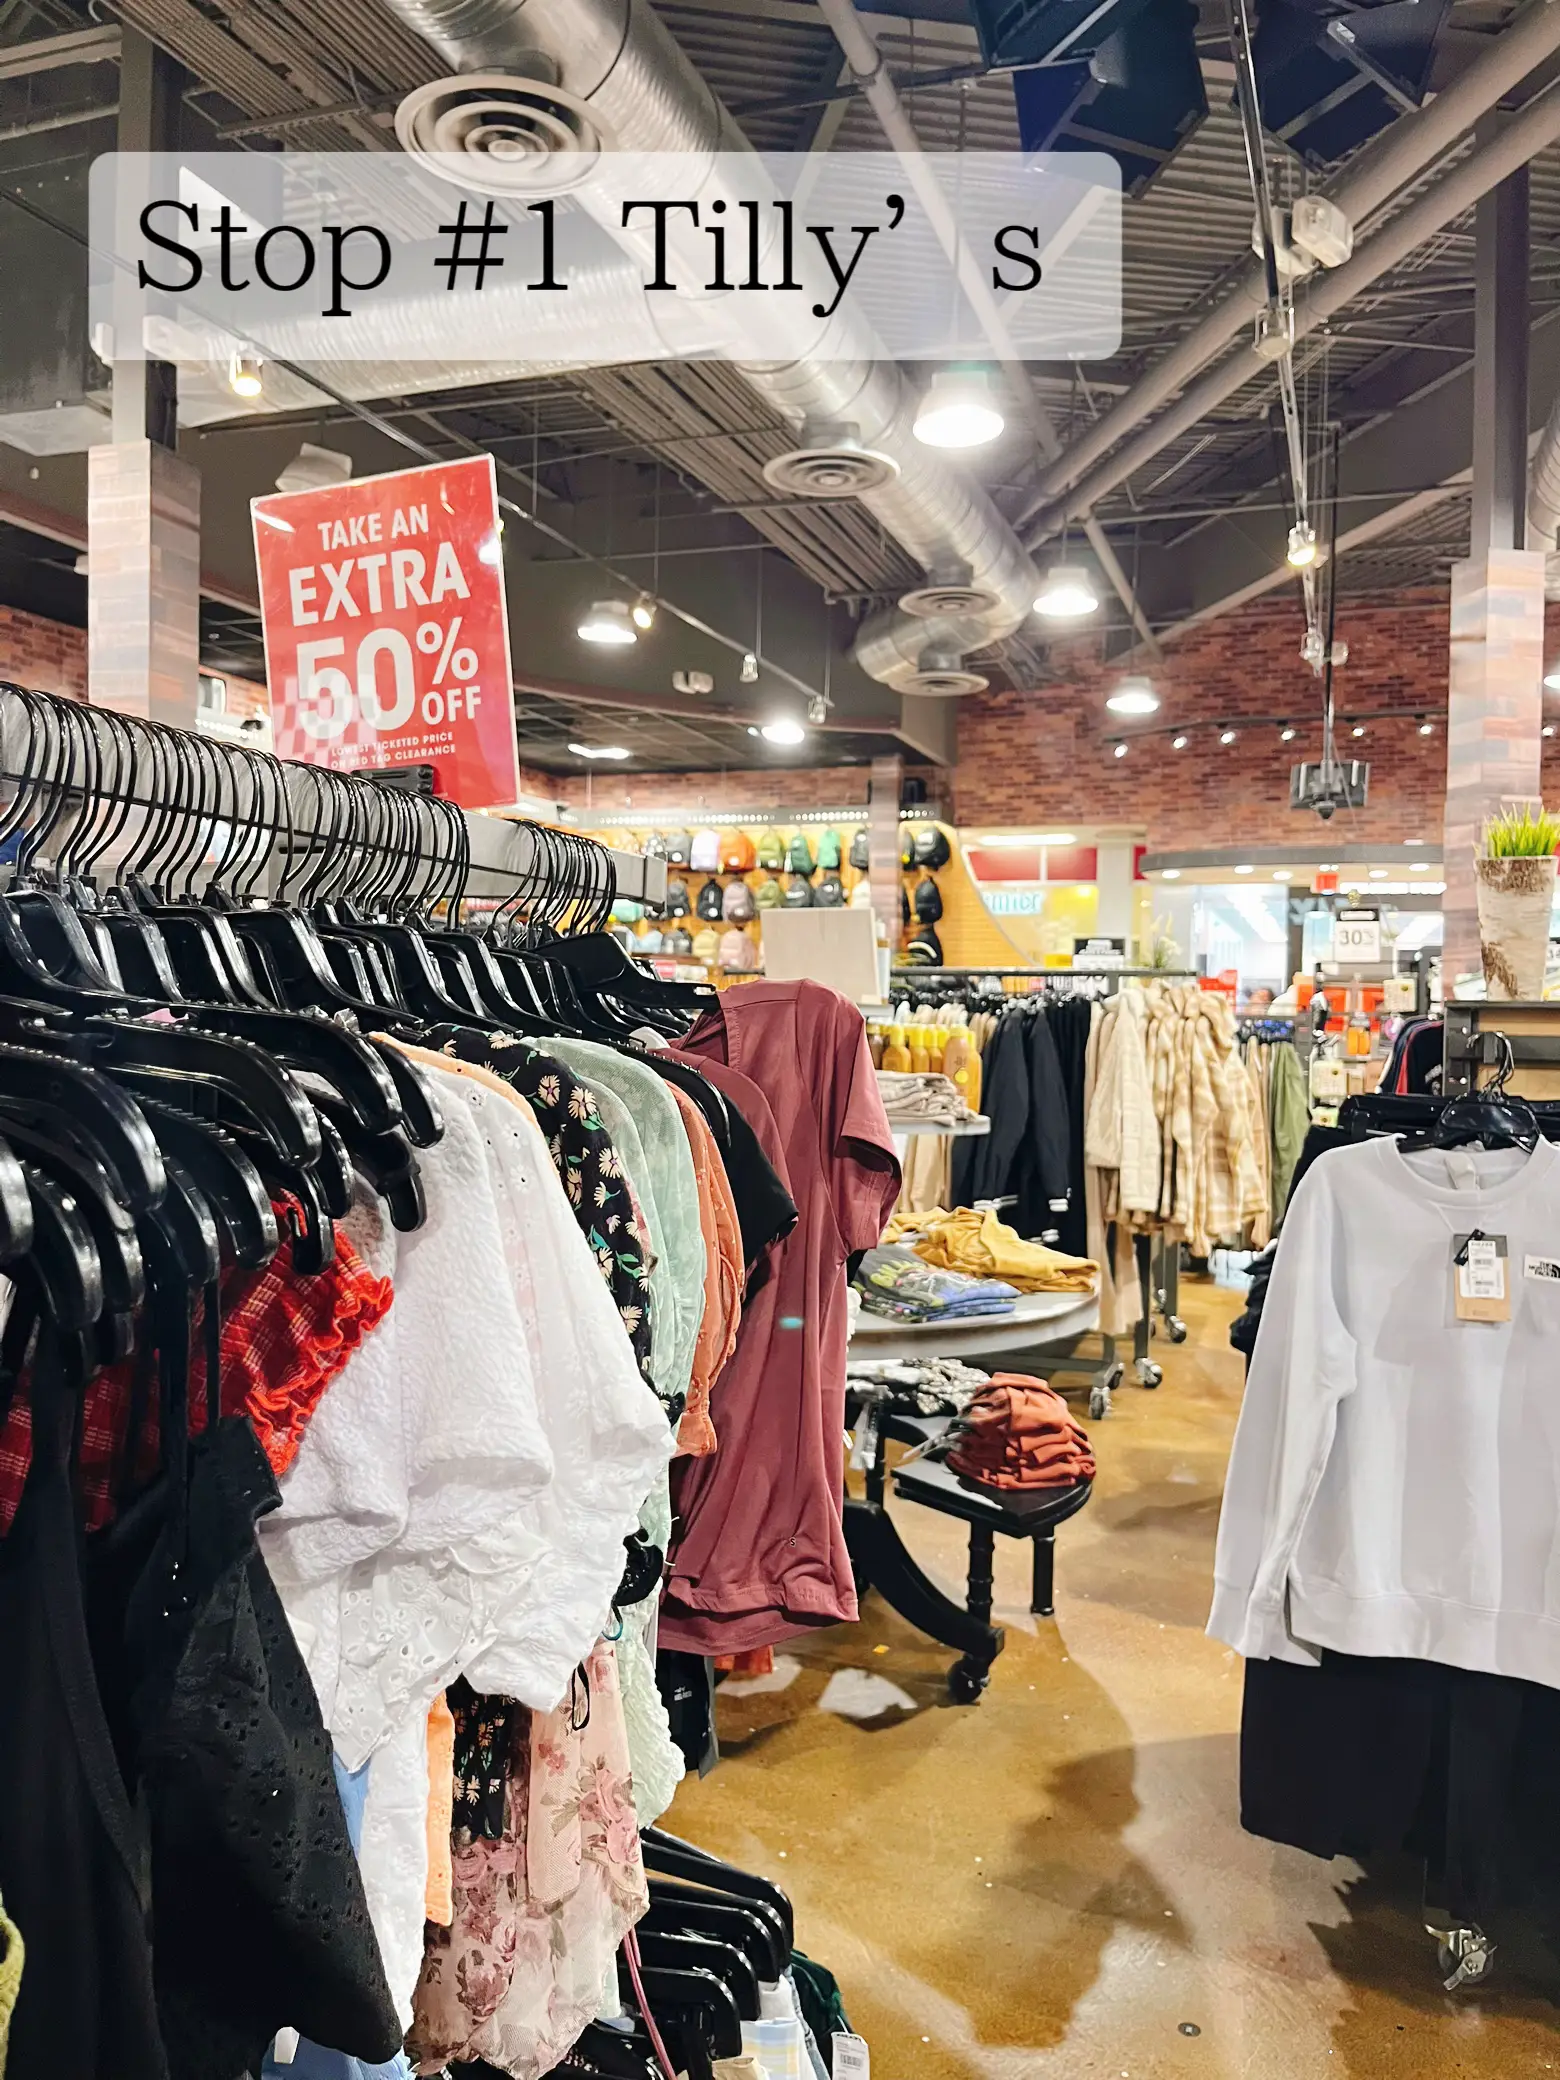 stires to buy clothes from at the mall - Lemon8 Search